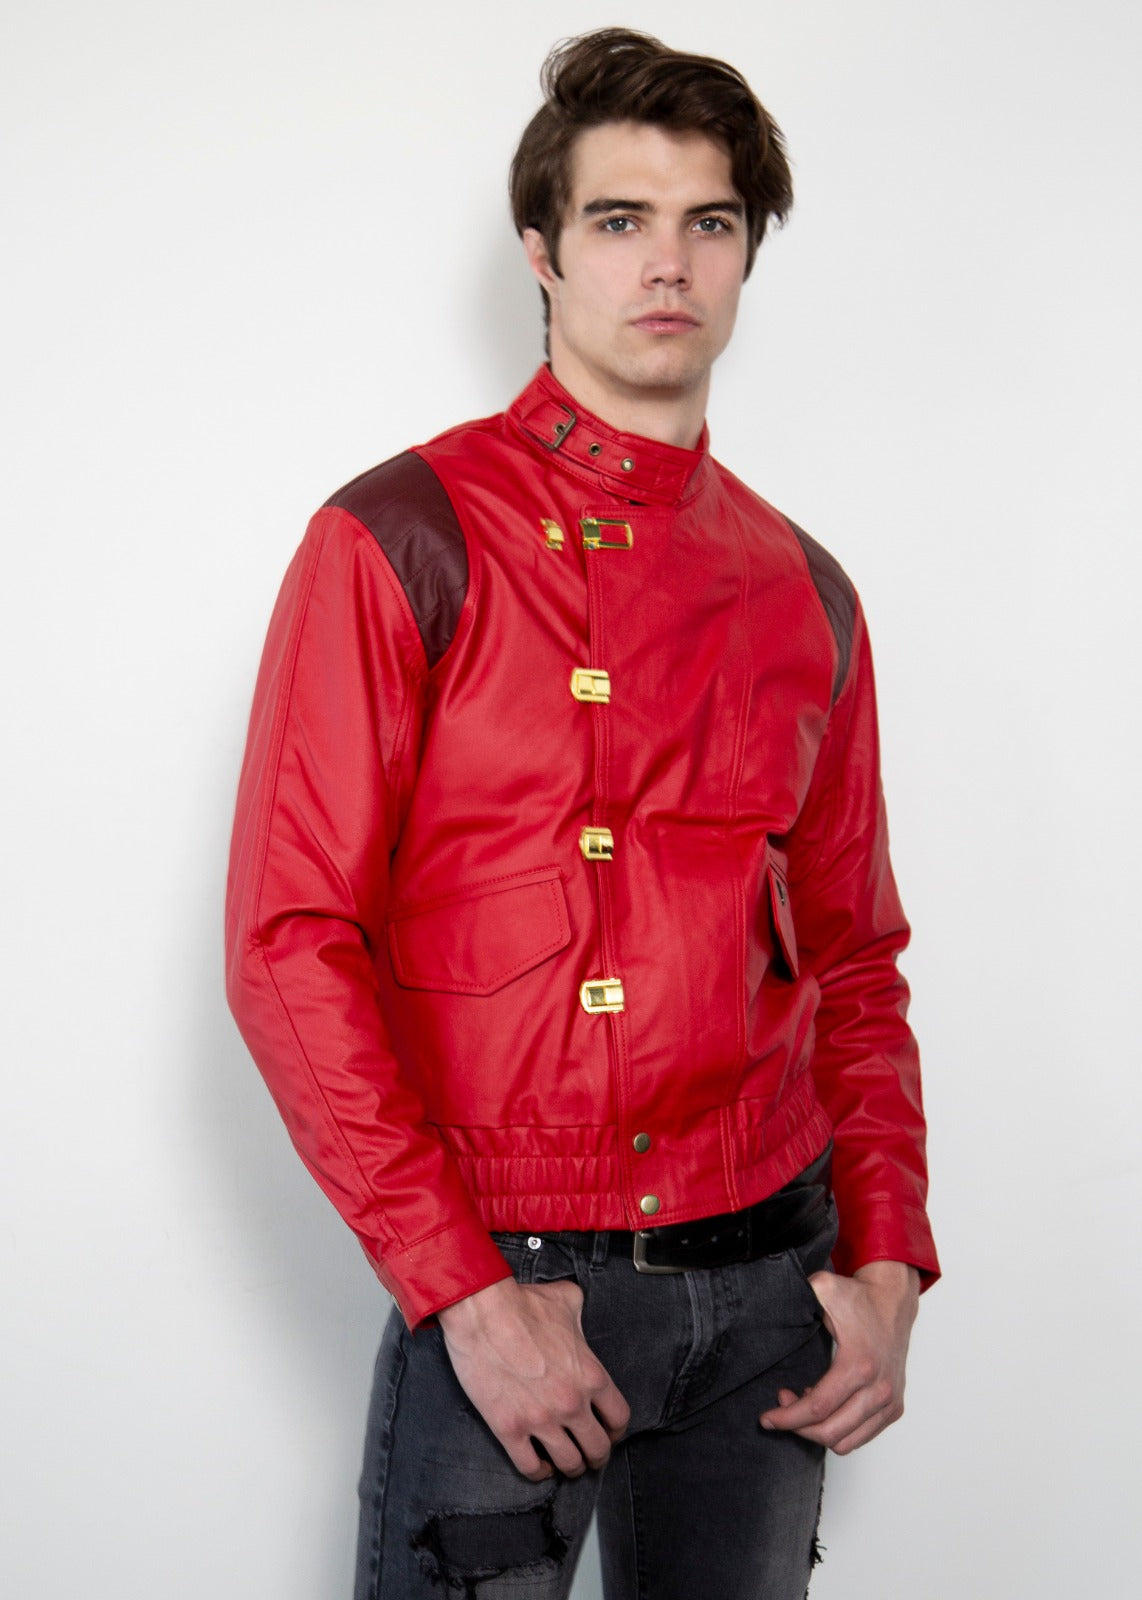 Akira Kaneda screen accurate Red Leather Jacket with Pill on Back